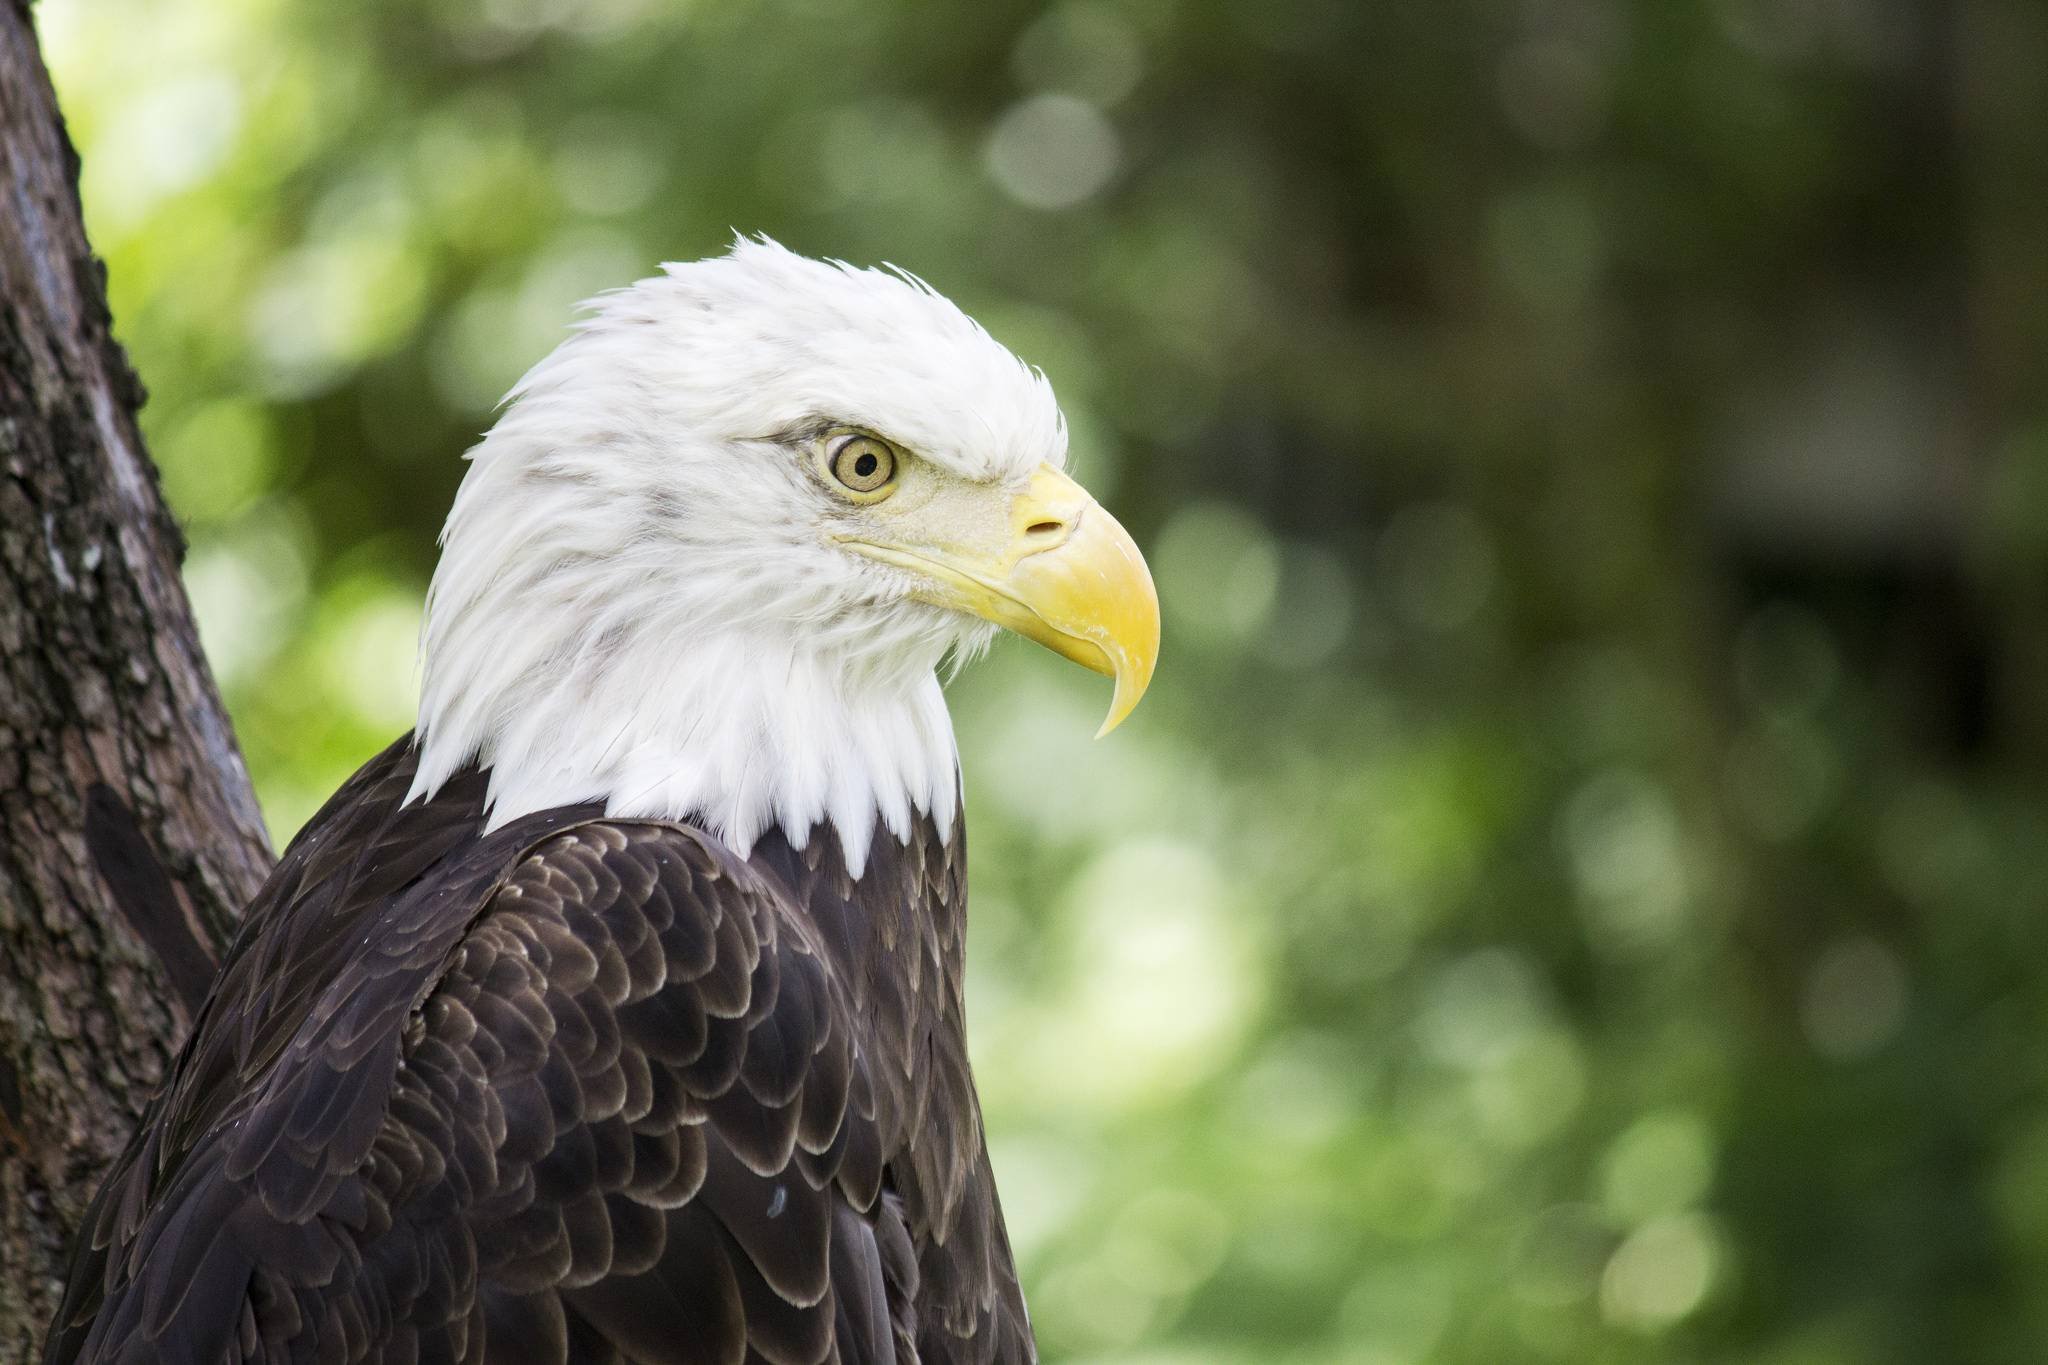 Everything you think you know about bald eagles is wrong